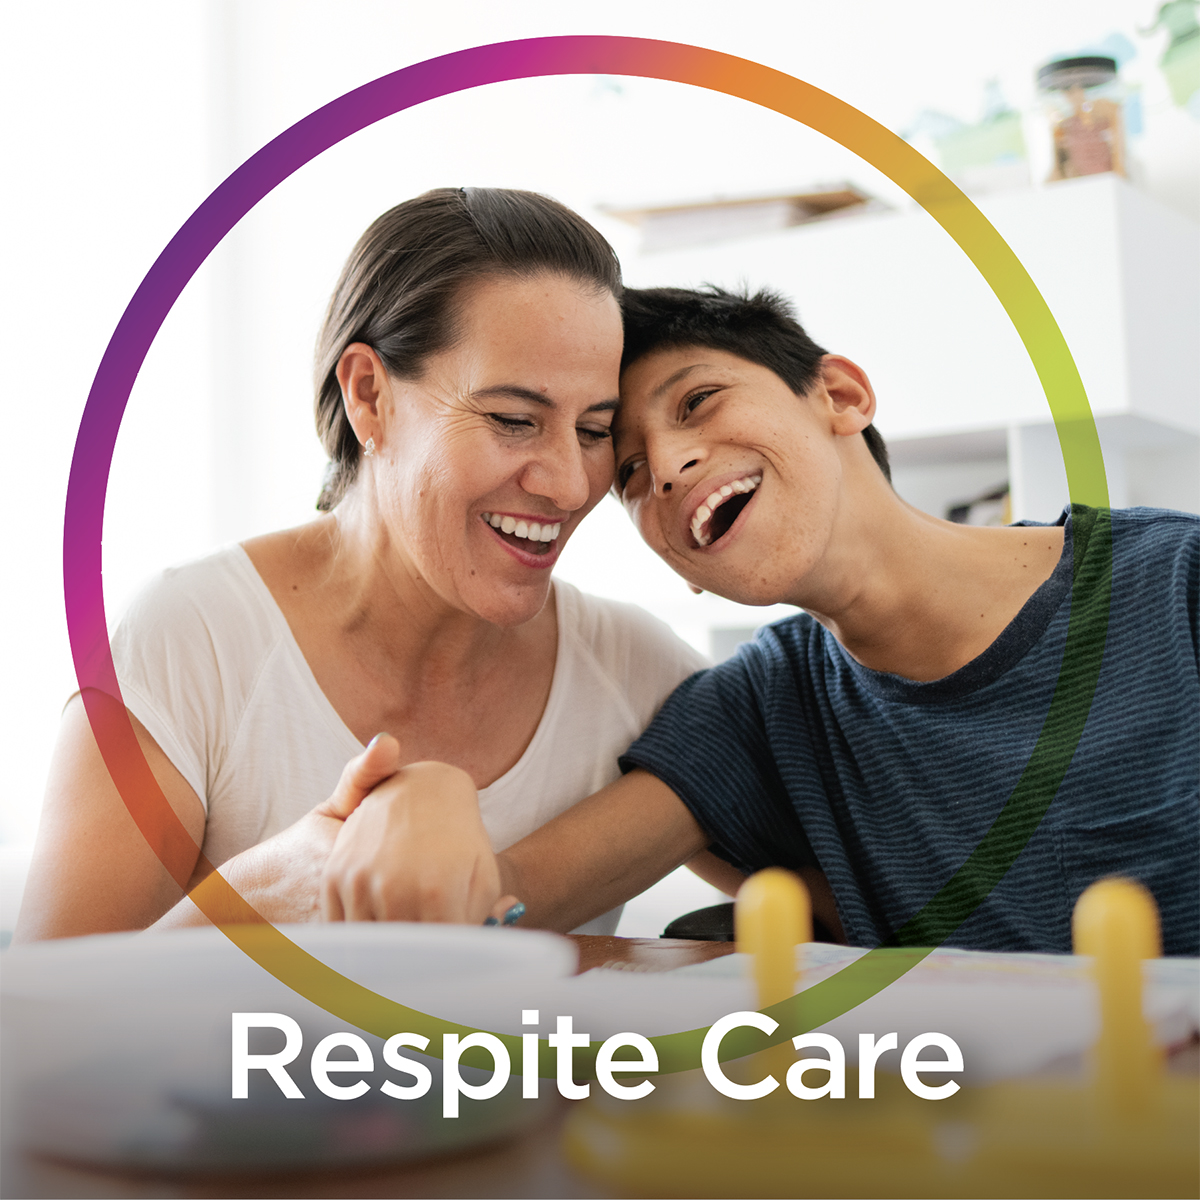 As we continue to celebrate #CaregivingHappens – we are reminded of the importance of Respite Care Providers. RewardingWork.org offers free Respite Care Training for people in MA and KS. Learn more at RewardingWork.org/respite
 #RewardingWork  #CaregivingHappens